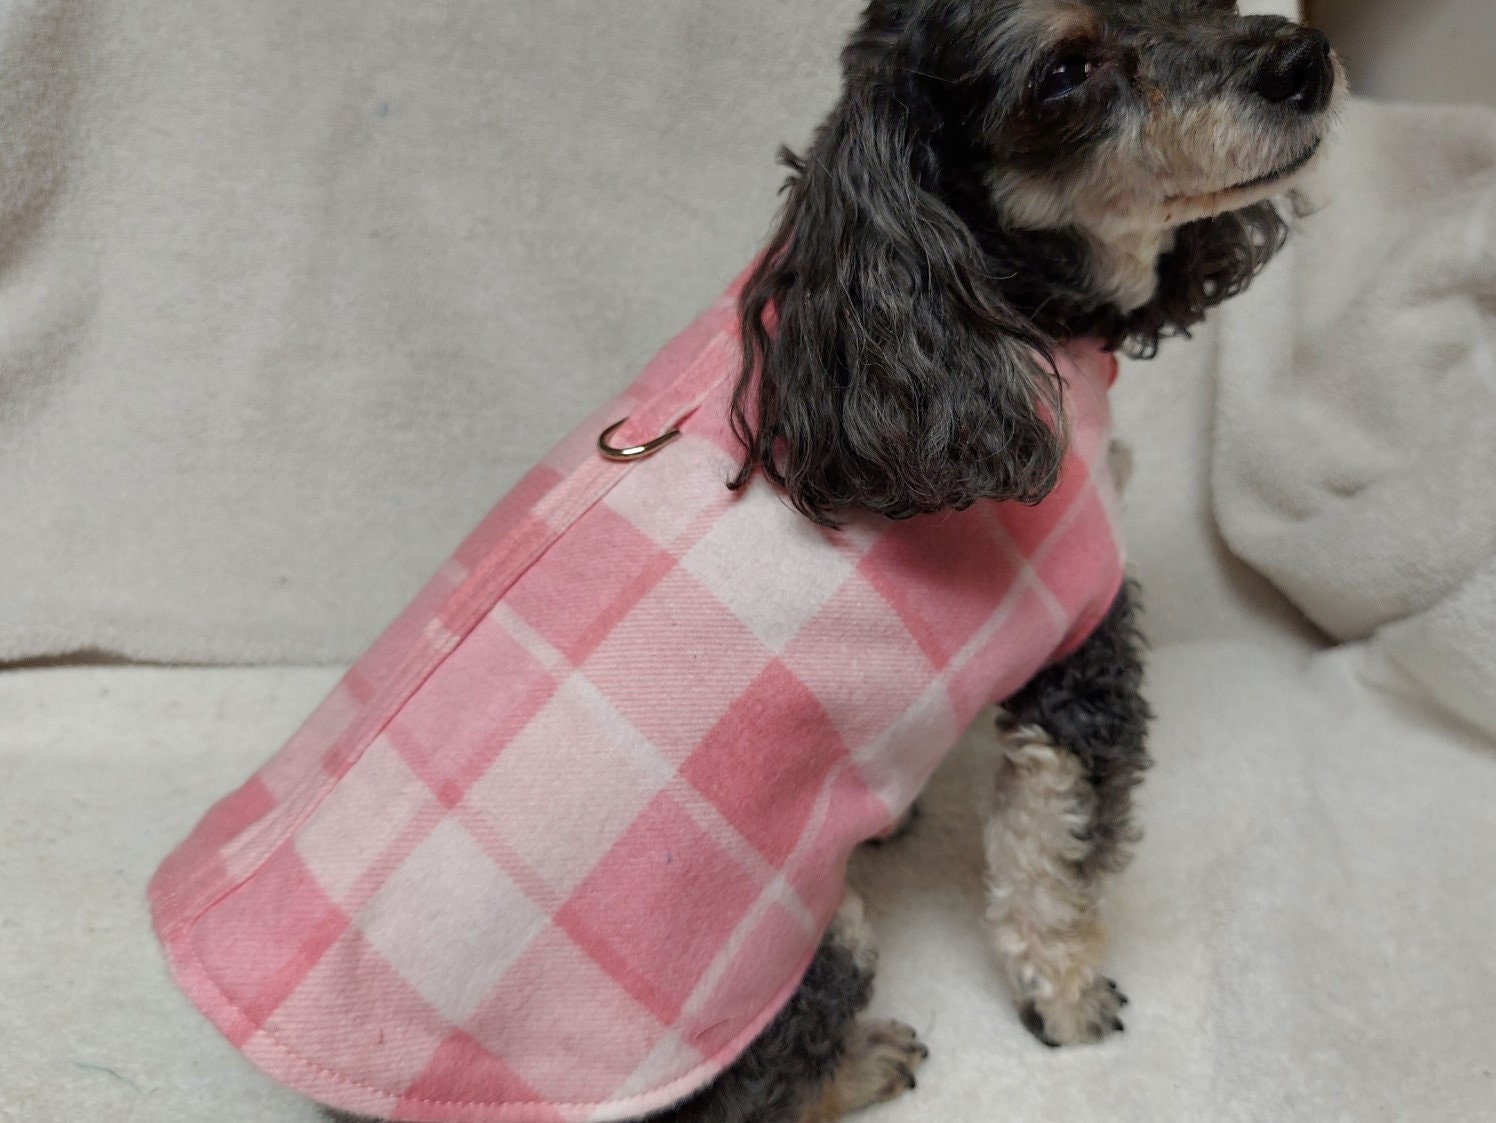 Fitwarm Ruffle Quilted Dog Coat, Pet Puffer Jacket with Hood, Dog Winter Clothes for Small Dogs Girl, Cat Hooded Outfit, Pink, Xs